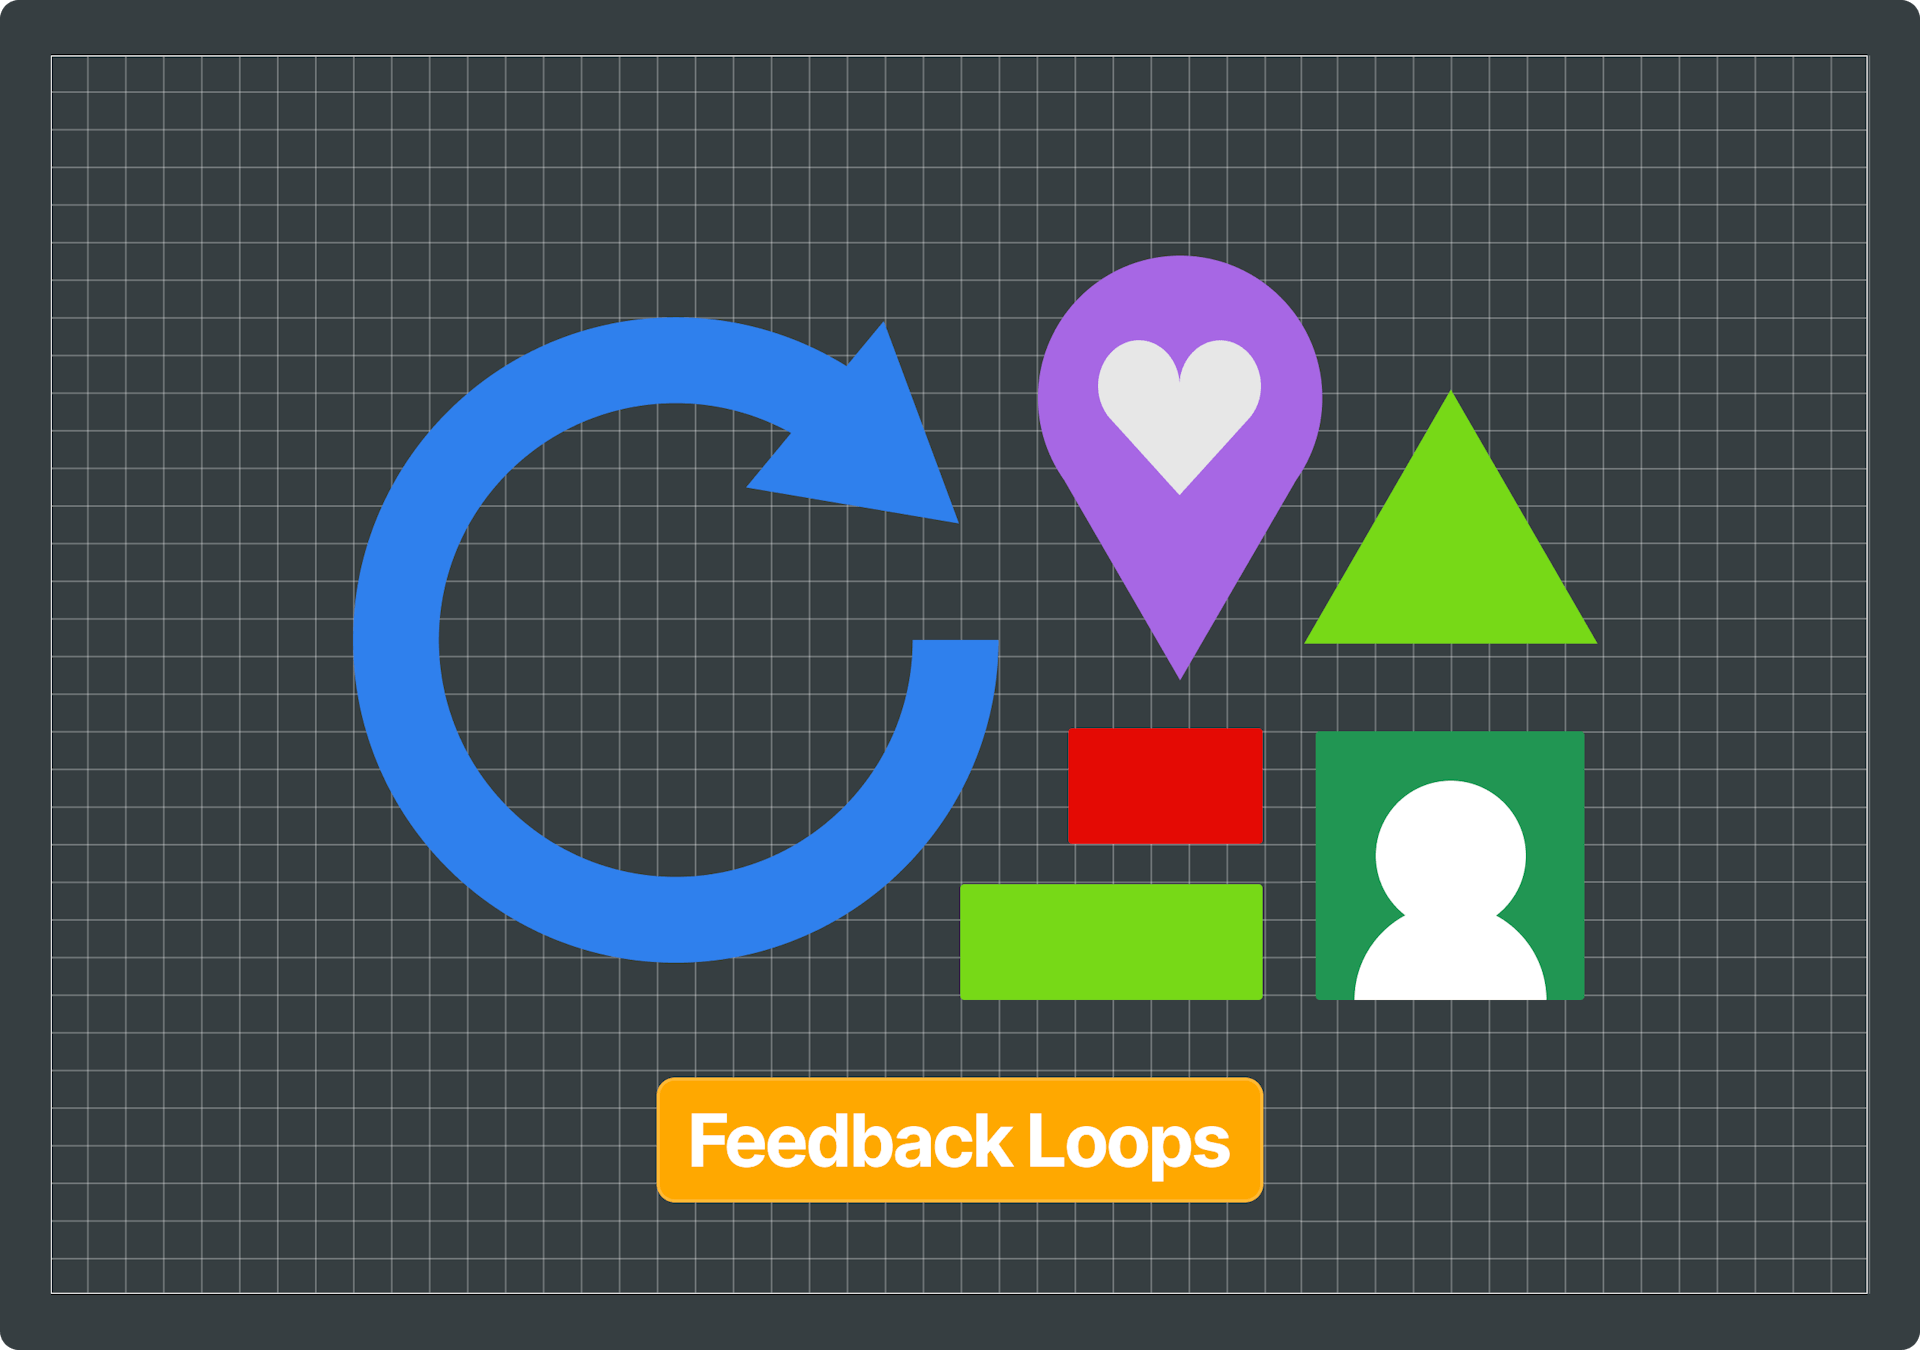 Illustration that shows an arrow in the form of a loop, alongside a heart, an upwards arrow and a character. Includes text that says "Feedback Loops".